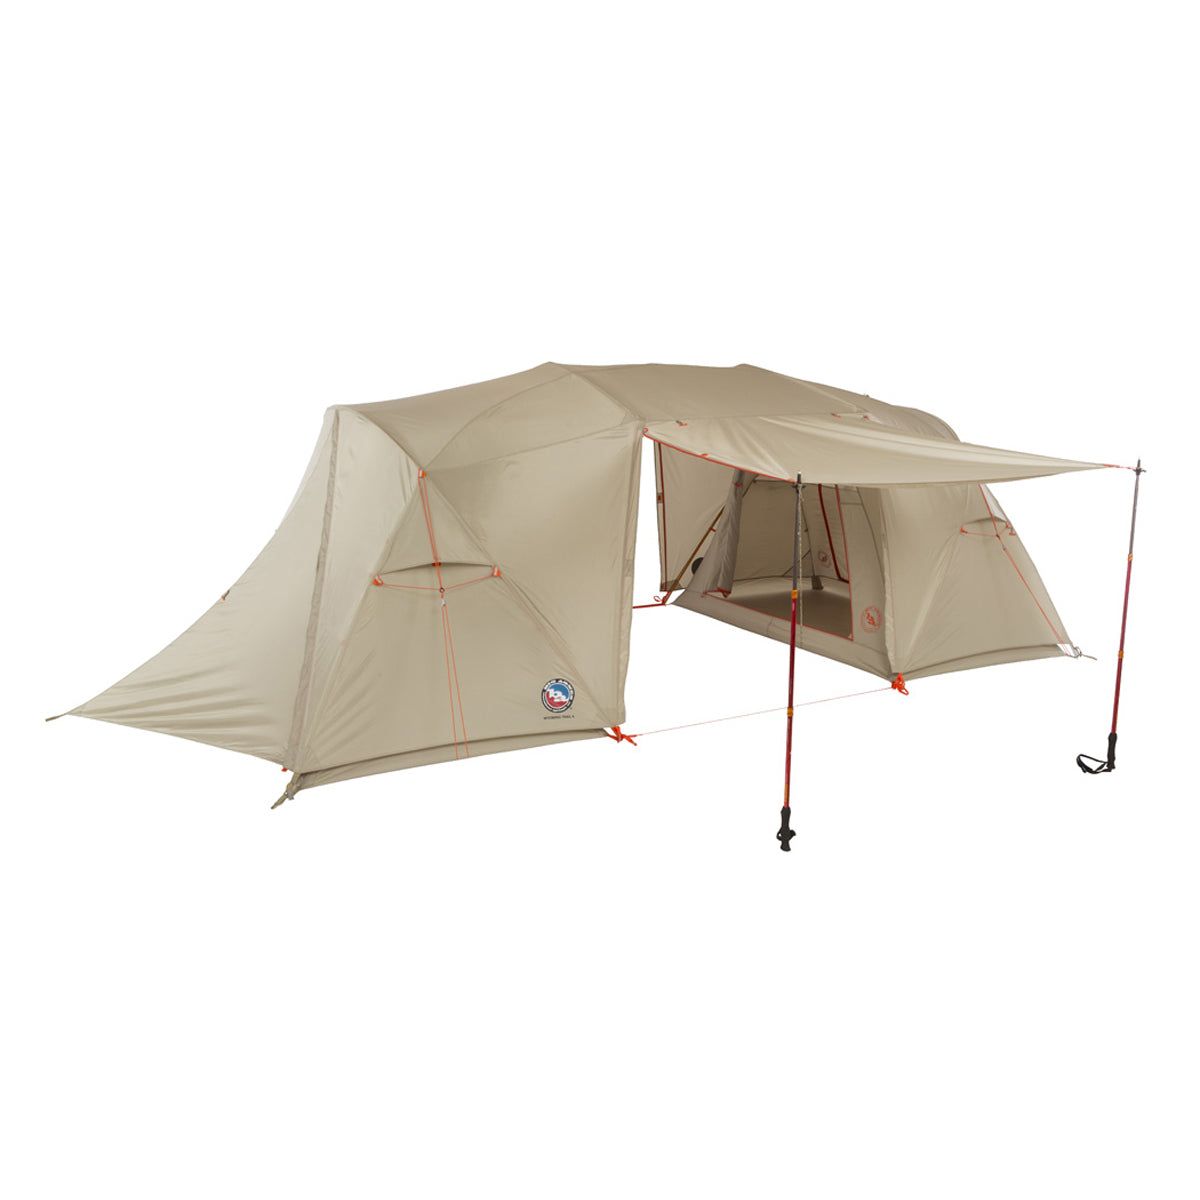 Big Agnes Wyoming Trail 4 Person Tent